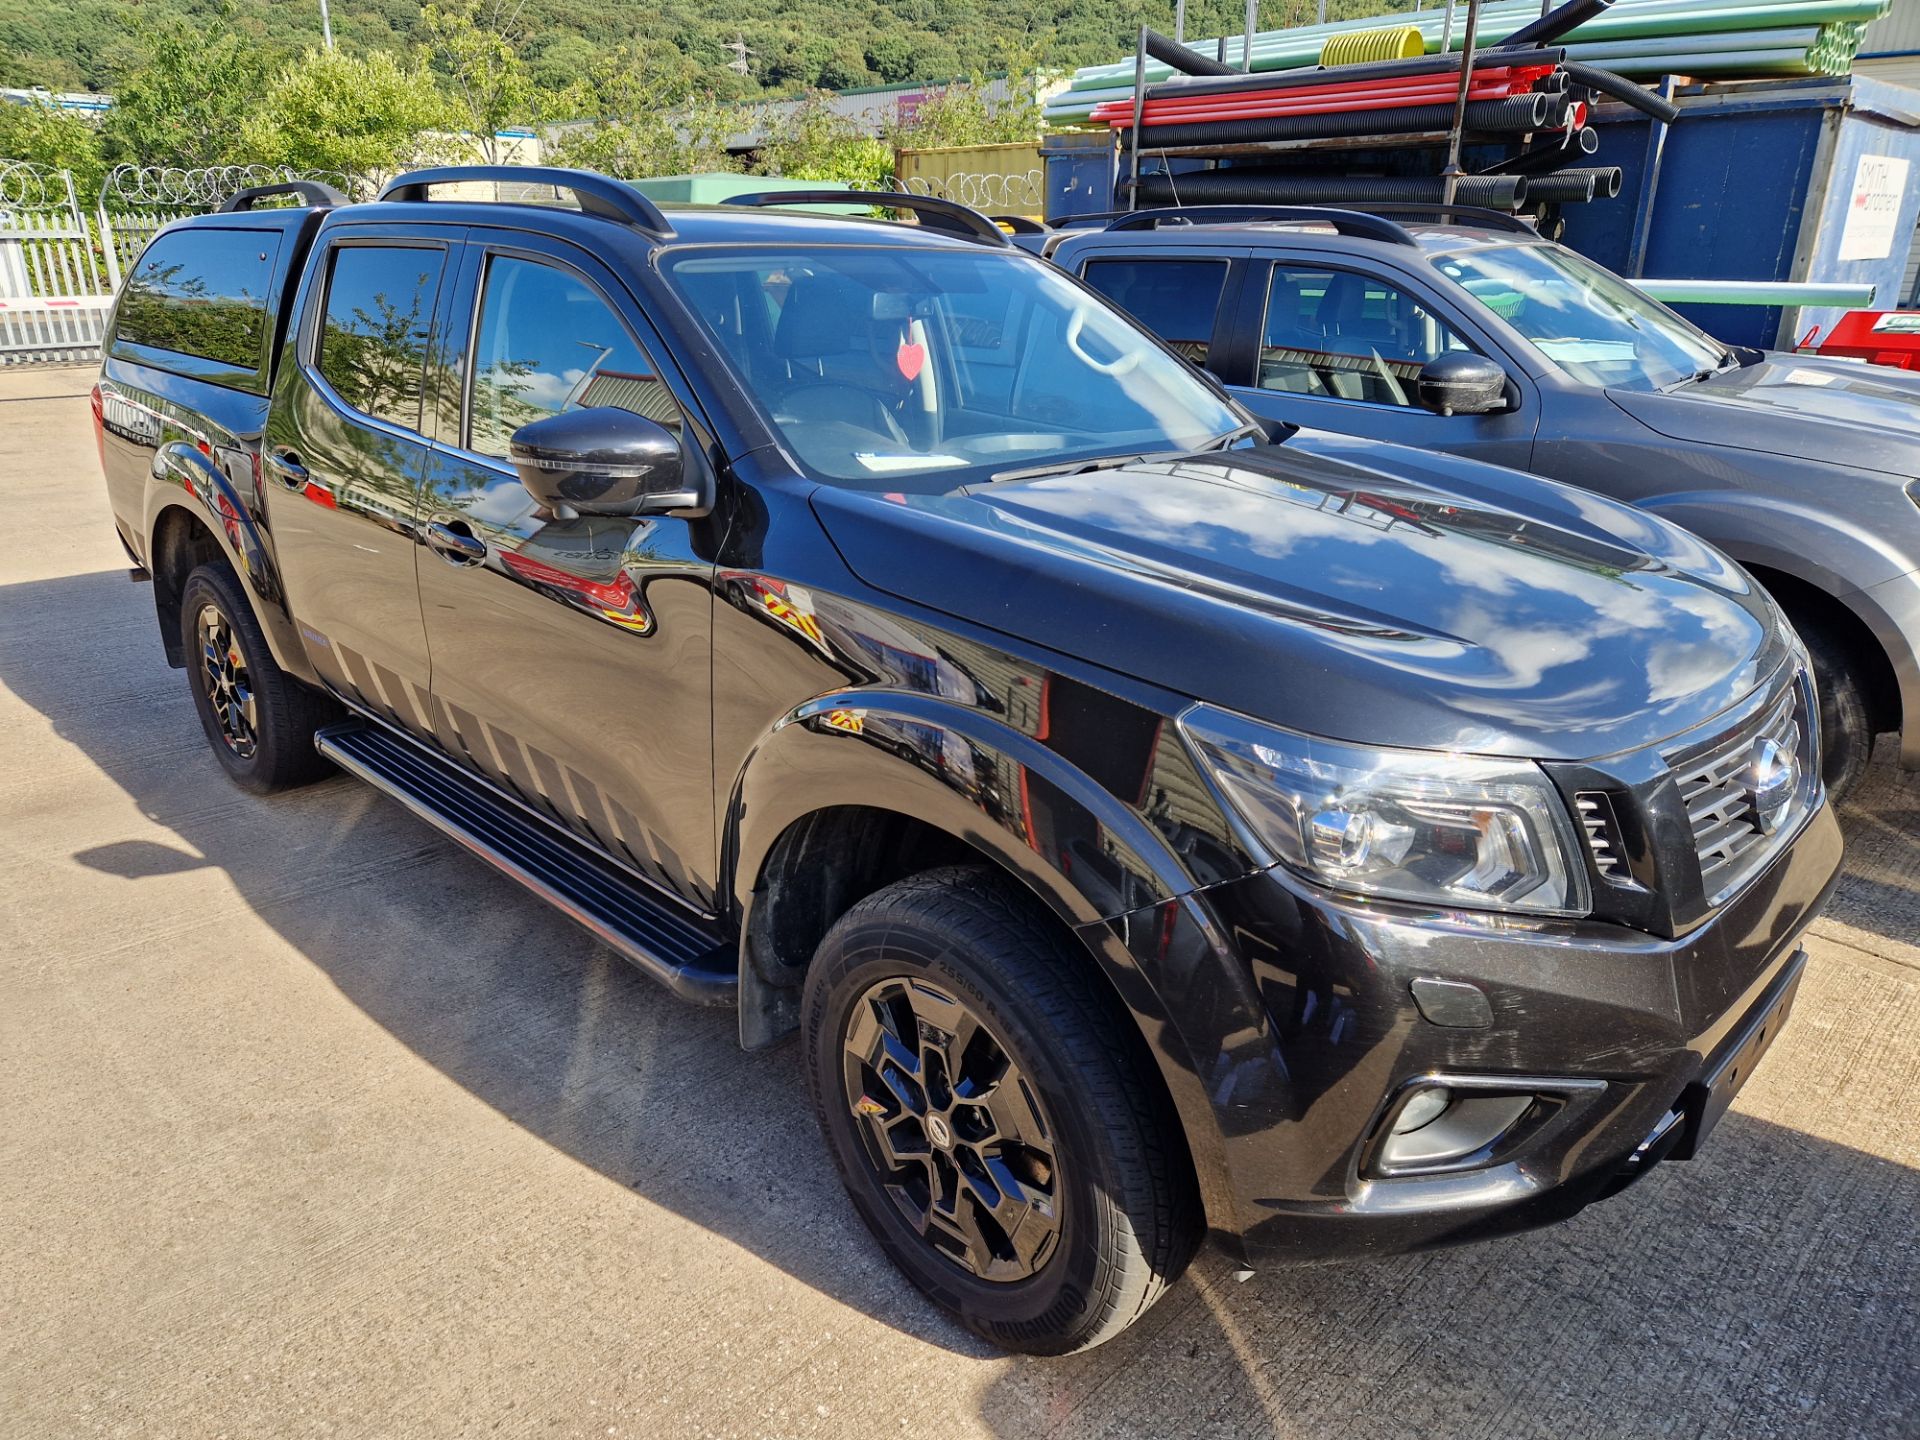 NISSAN Navara Special Edition N-Guard 2.3dCi 190 TT 4WD Auto Double Cab Pick Up, Registration No.